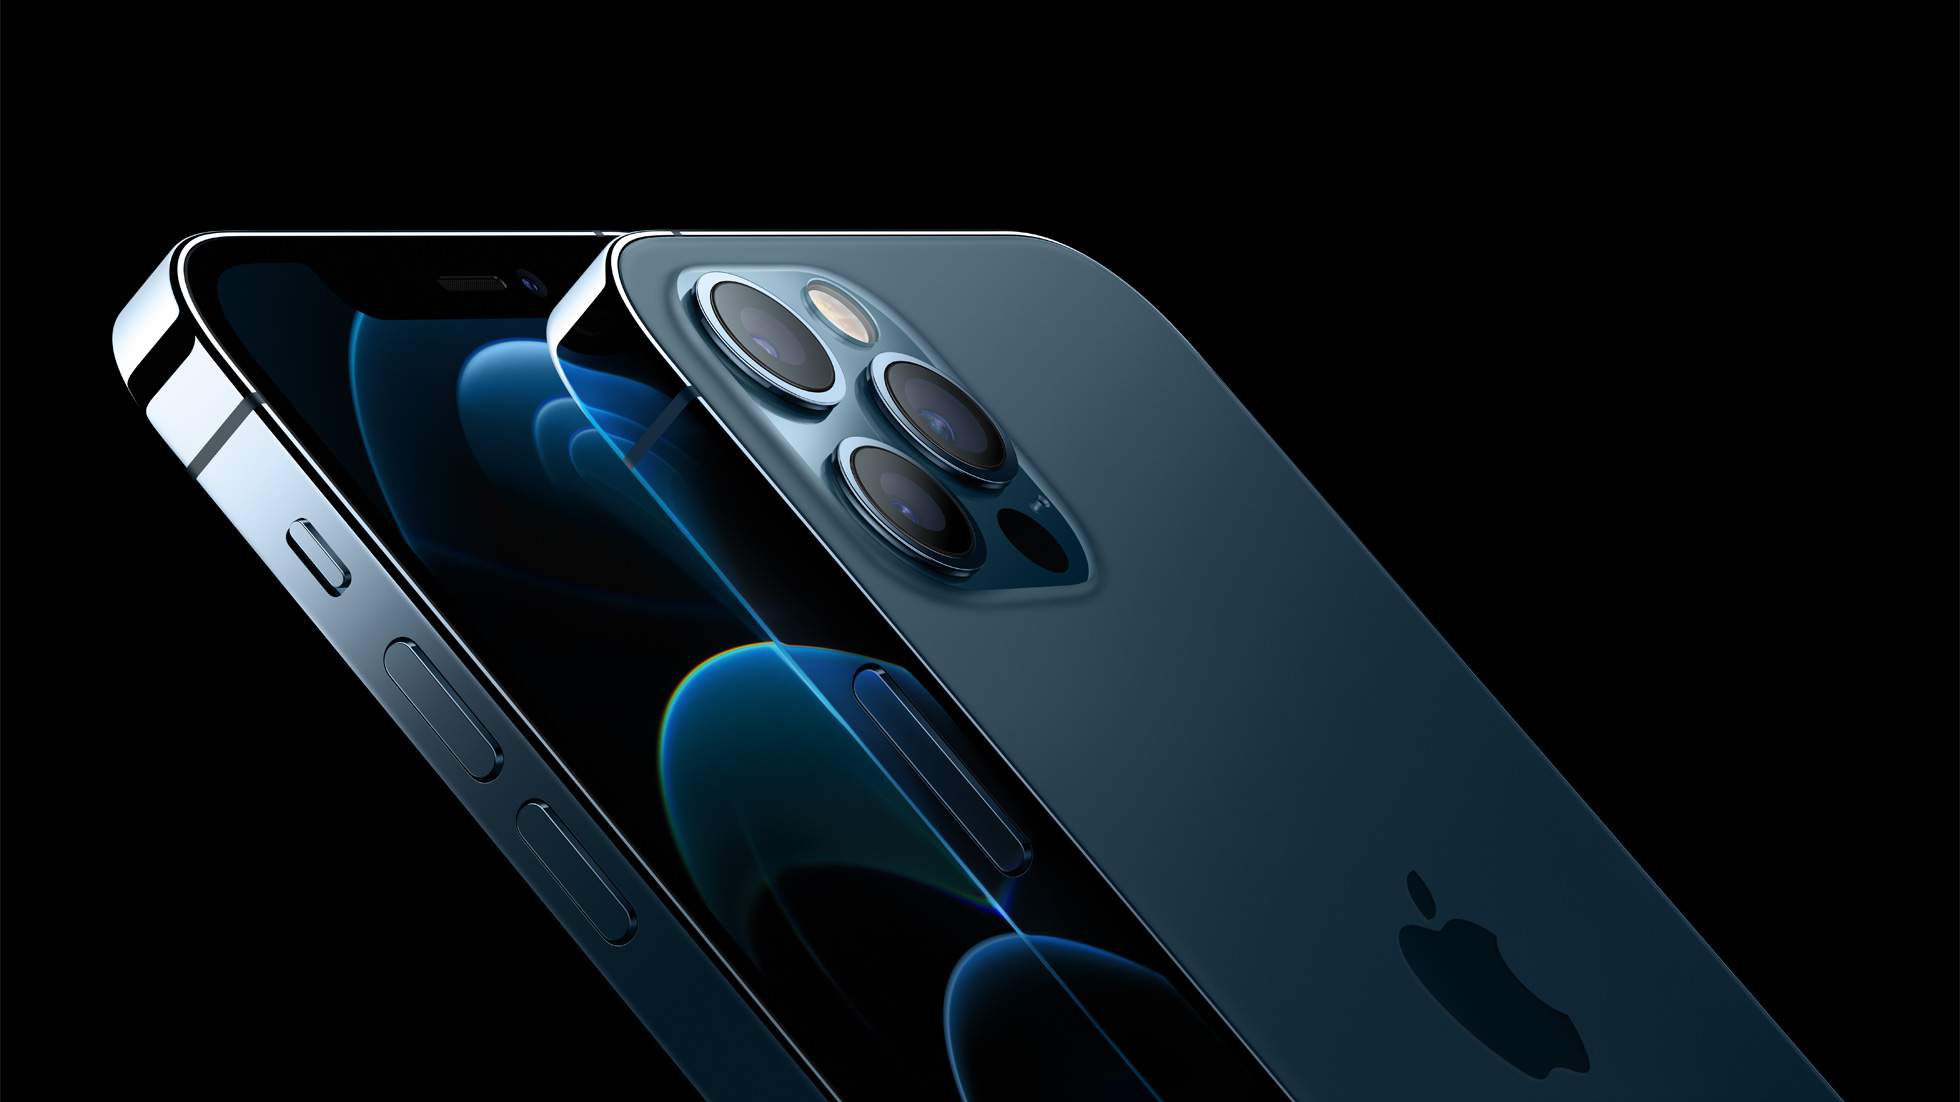 A side render of Apple's iPhone 12 pro smartphone on a black background